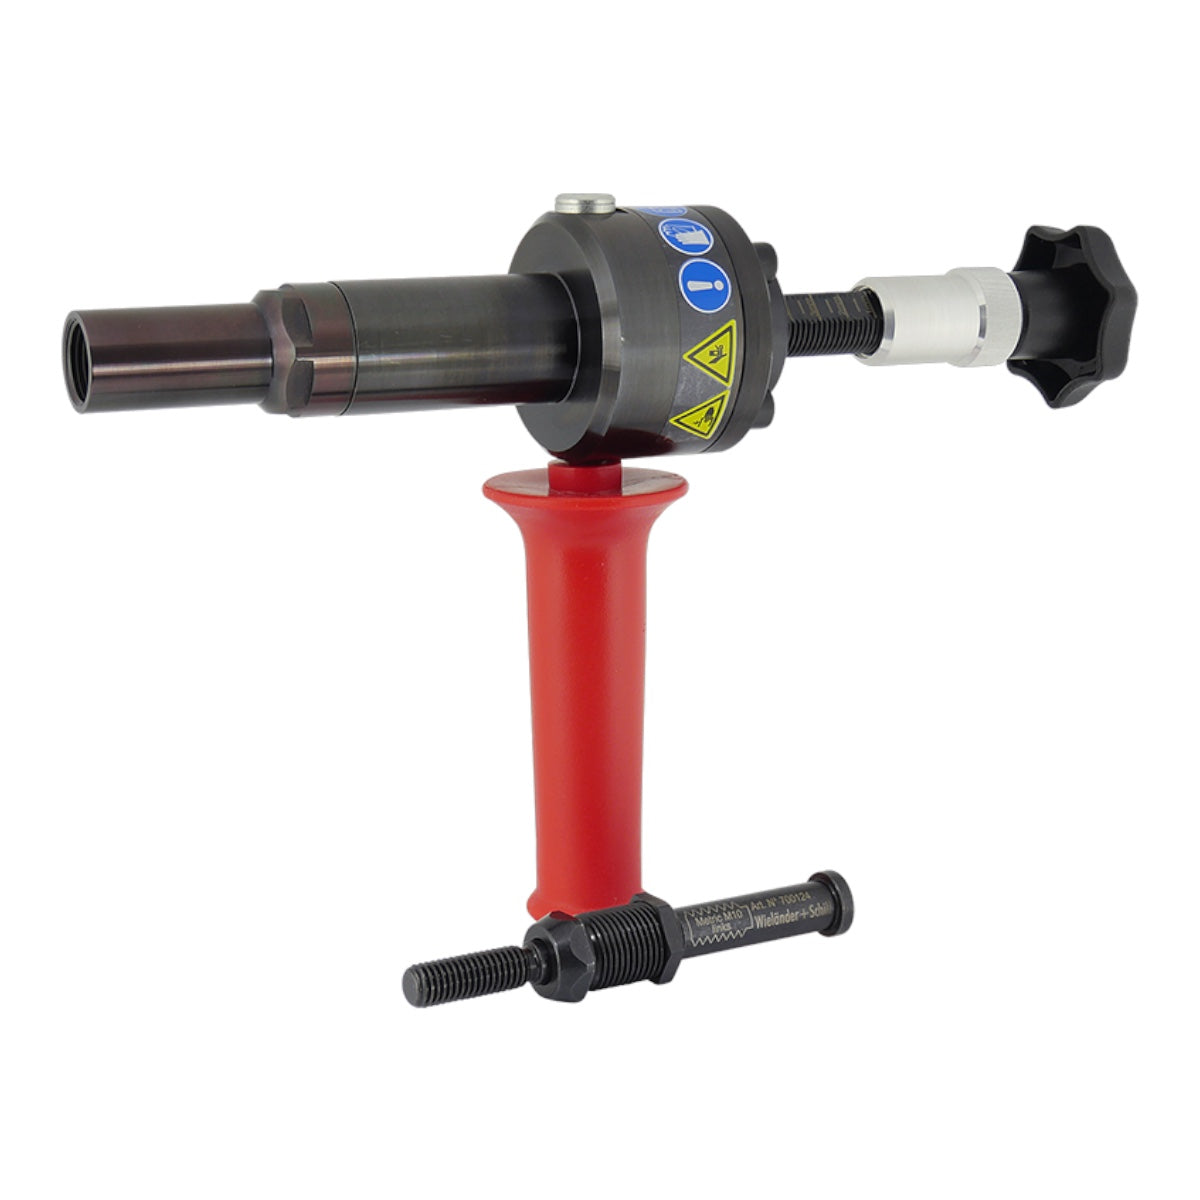 XPull mechanical-hydraulic riveting tool incl. pull adapter M10, left-hand thread